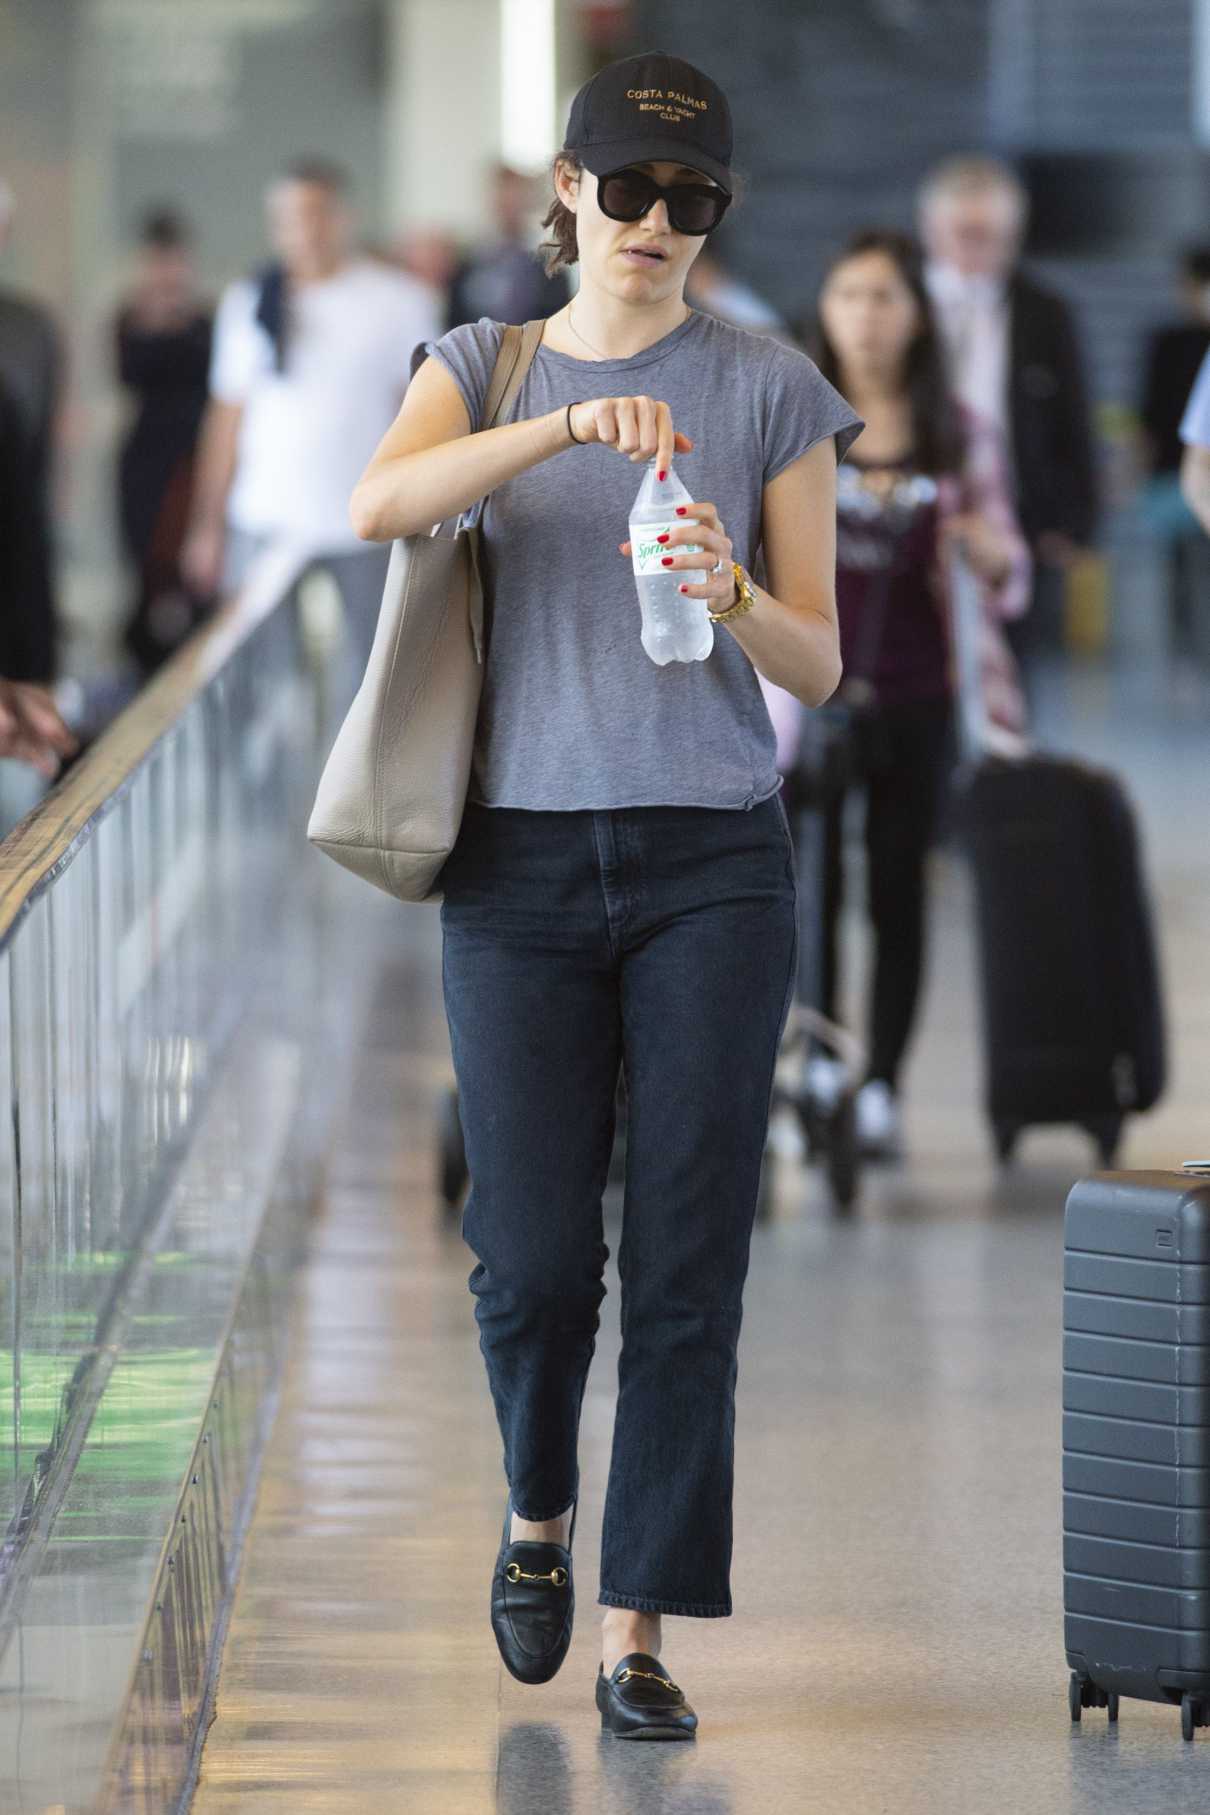 Emmy Rossum in a Gray Tee